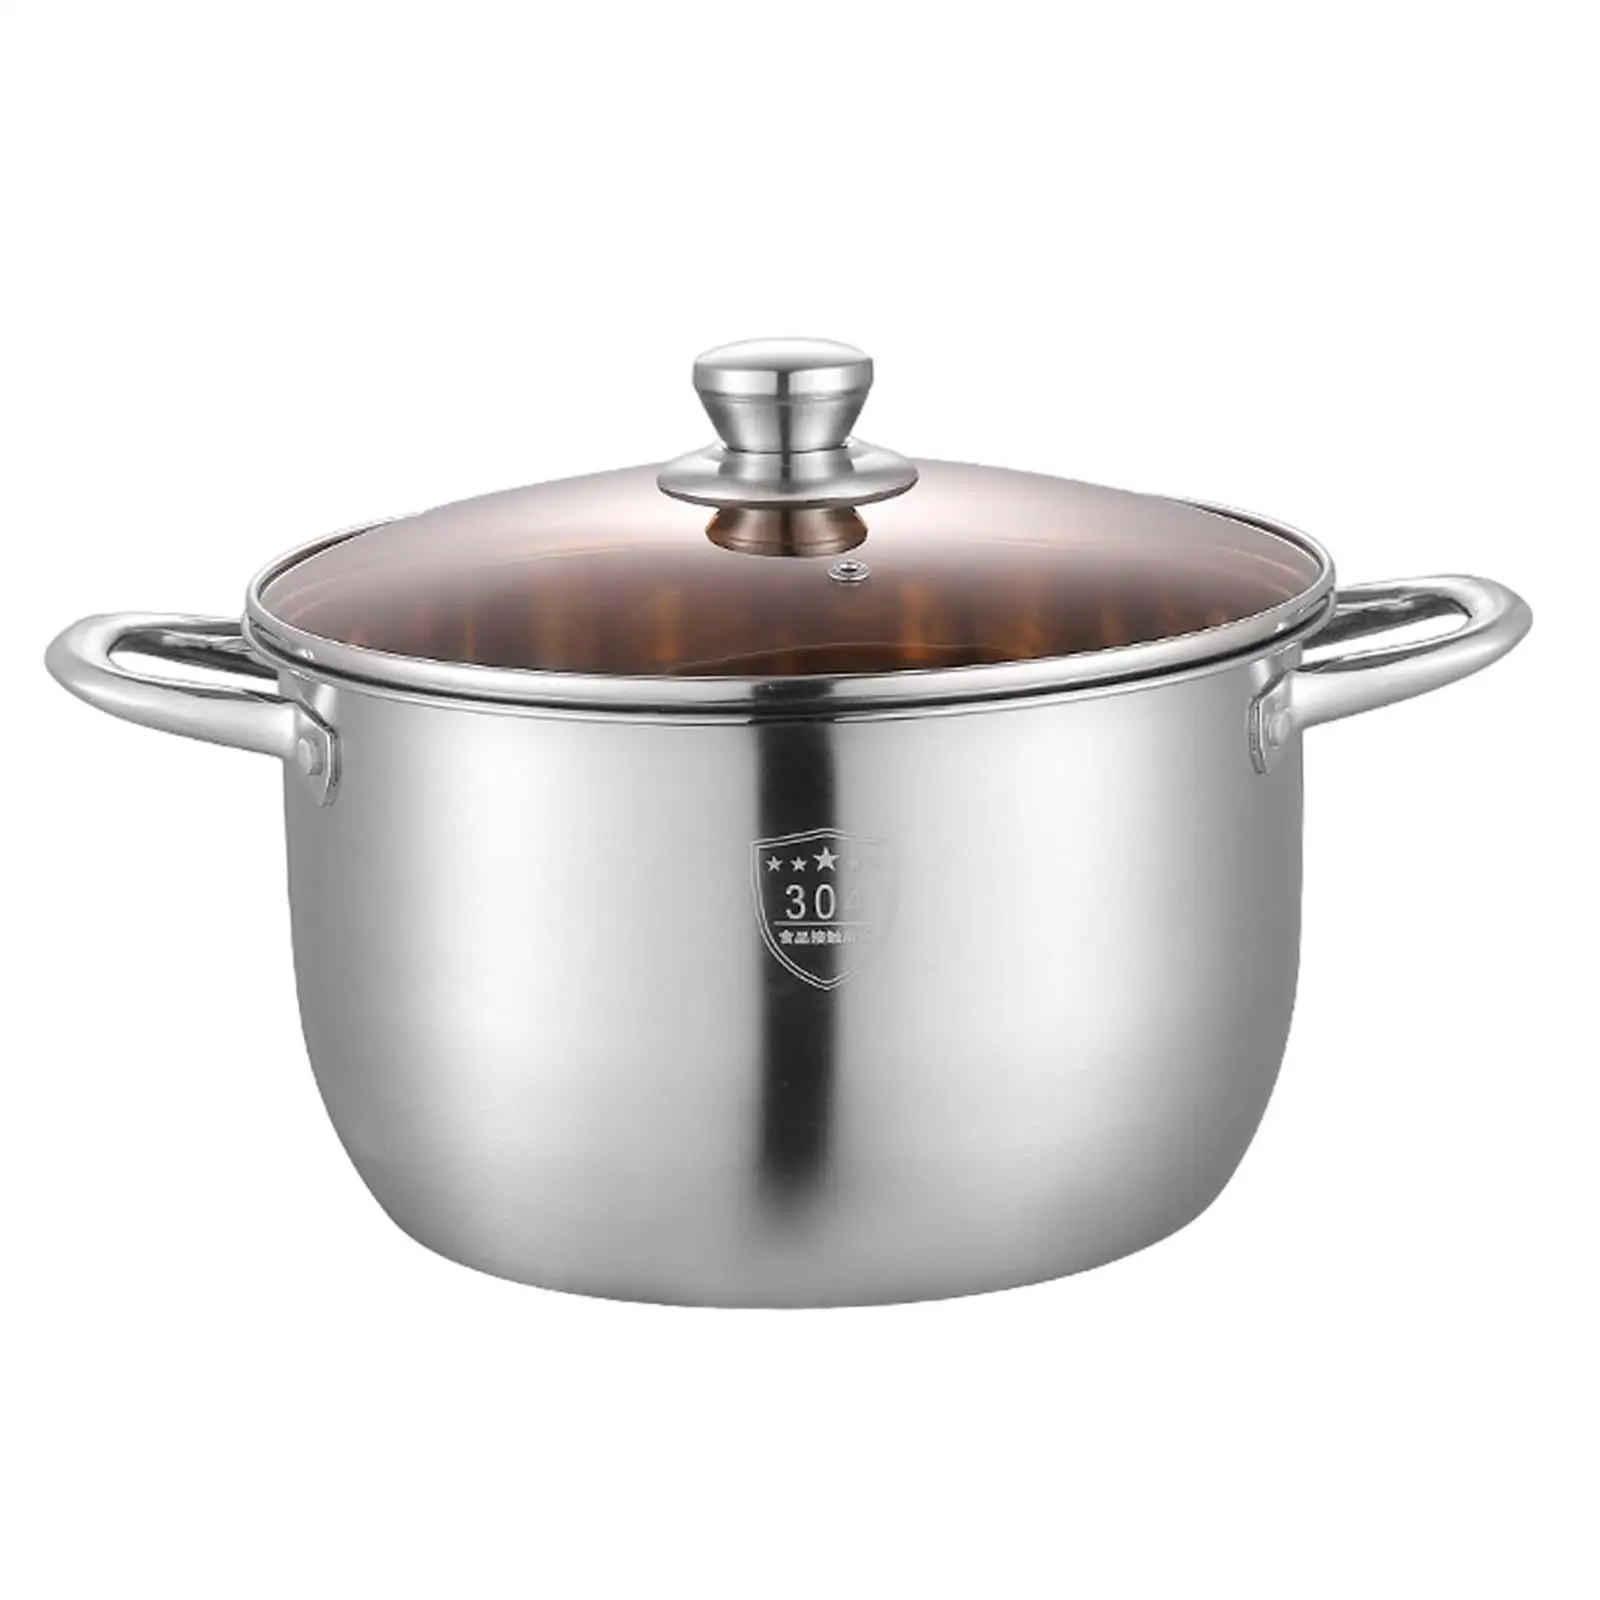 Stainless Steel Stockpot with Lid Double Handle Thick Bottom Cookware Kitchen Cooking Pot for Soup Sauce Meat Vegetables Noodles